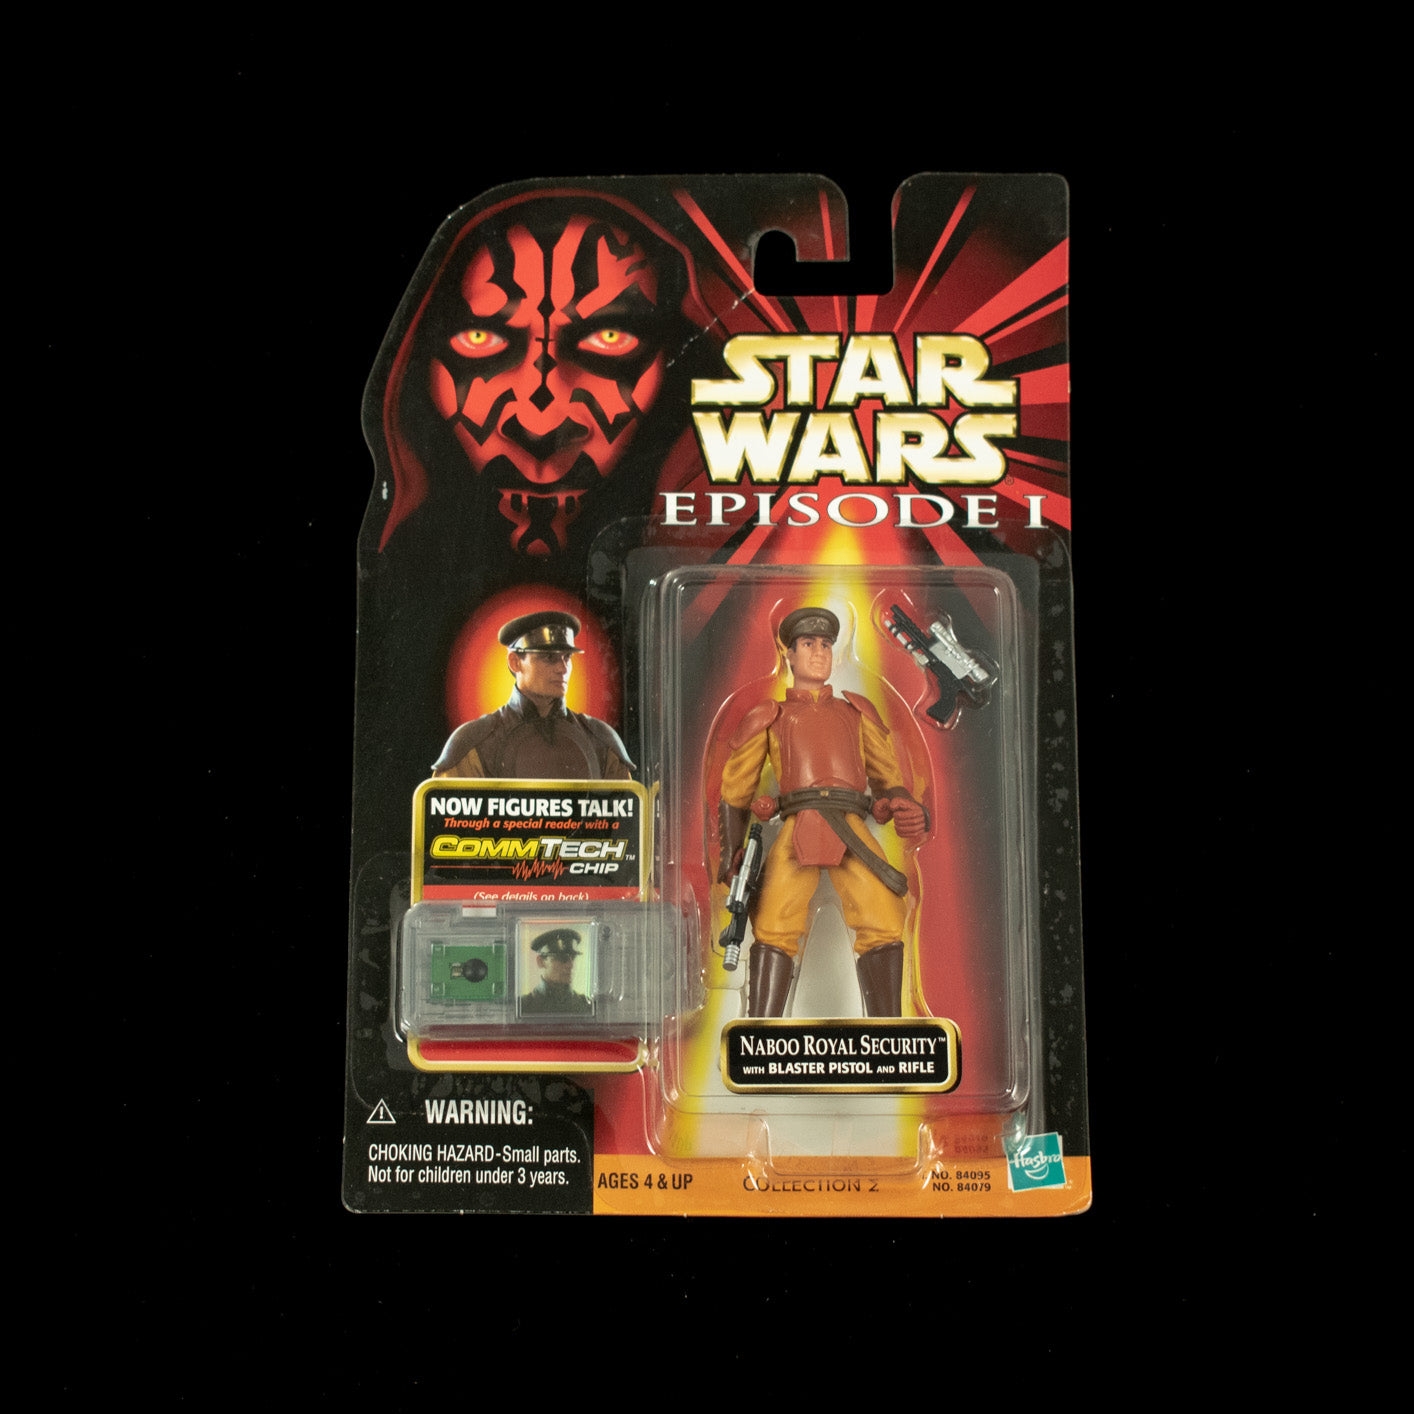 Star Wars Episode 1 Action Figure Naboo Royal Security